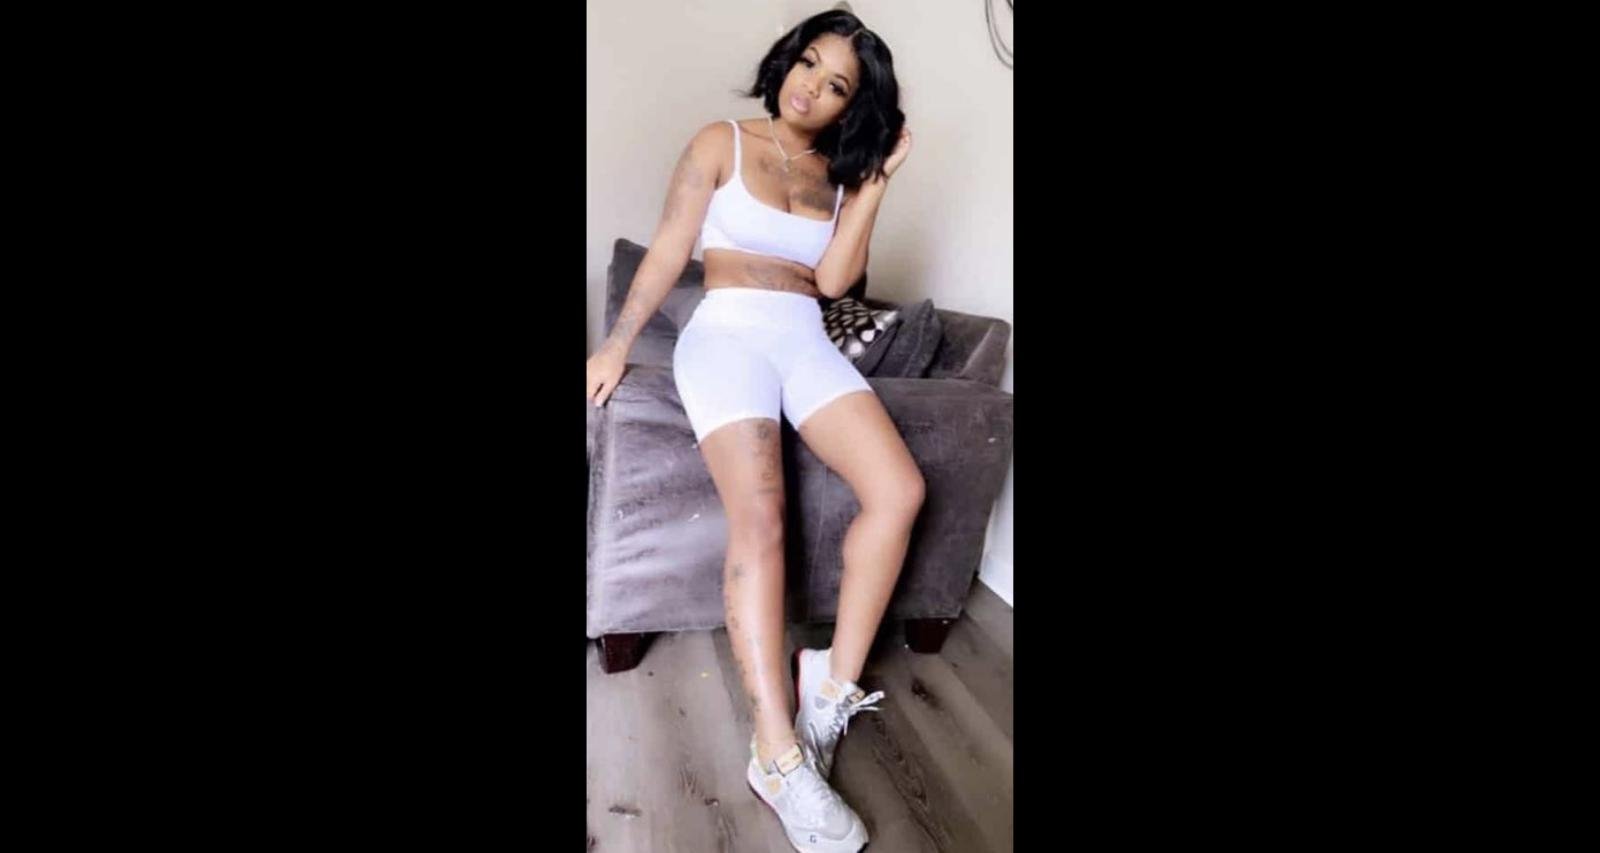 Chyna Santana Wiki, Age, Family, Education, Rant Ari Flether, Facts About Moneybagg Yo’s Baby Mama